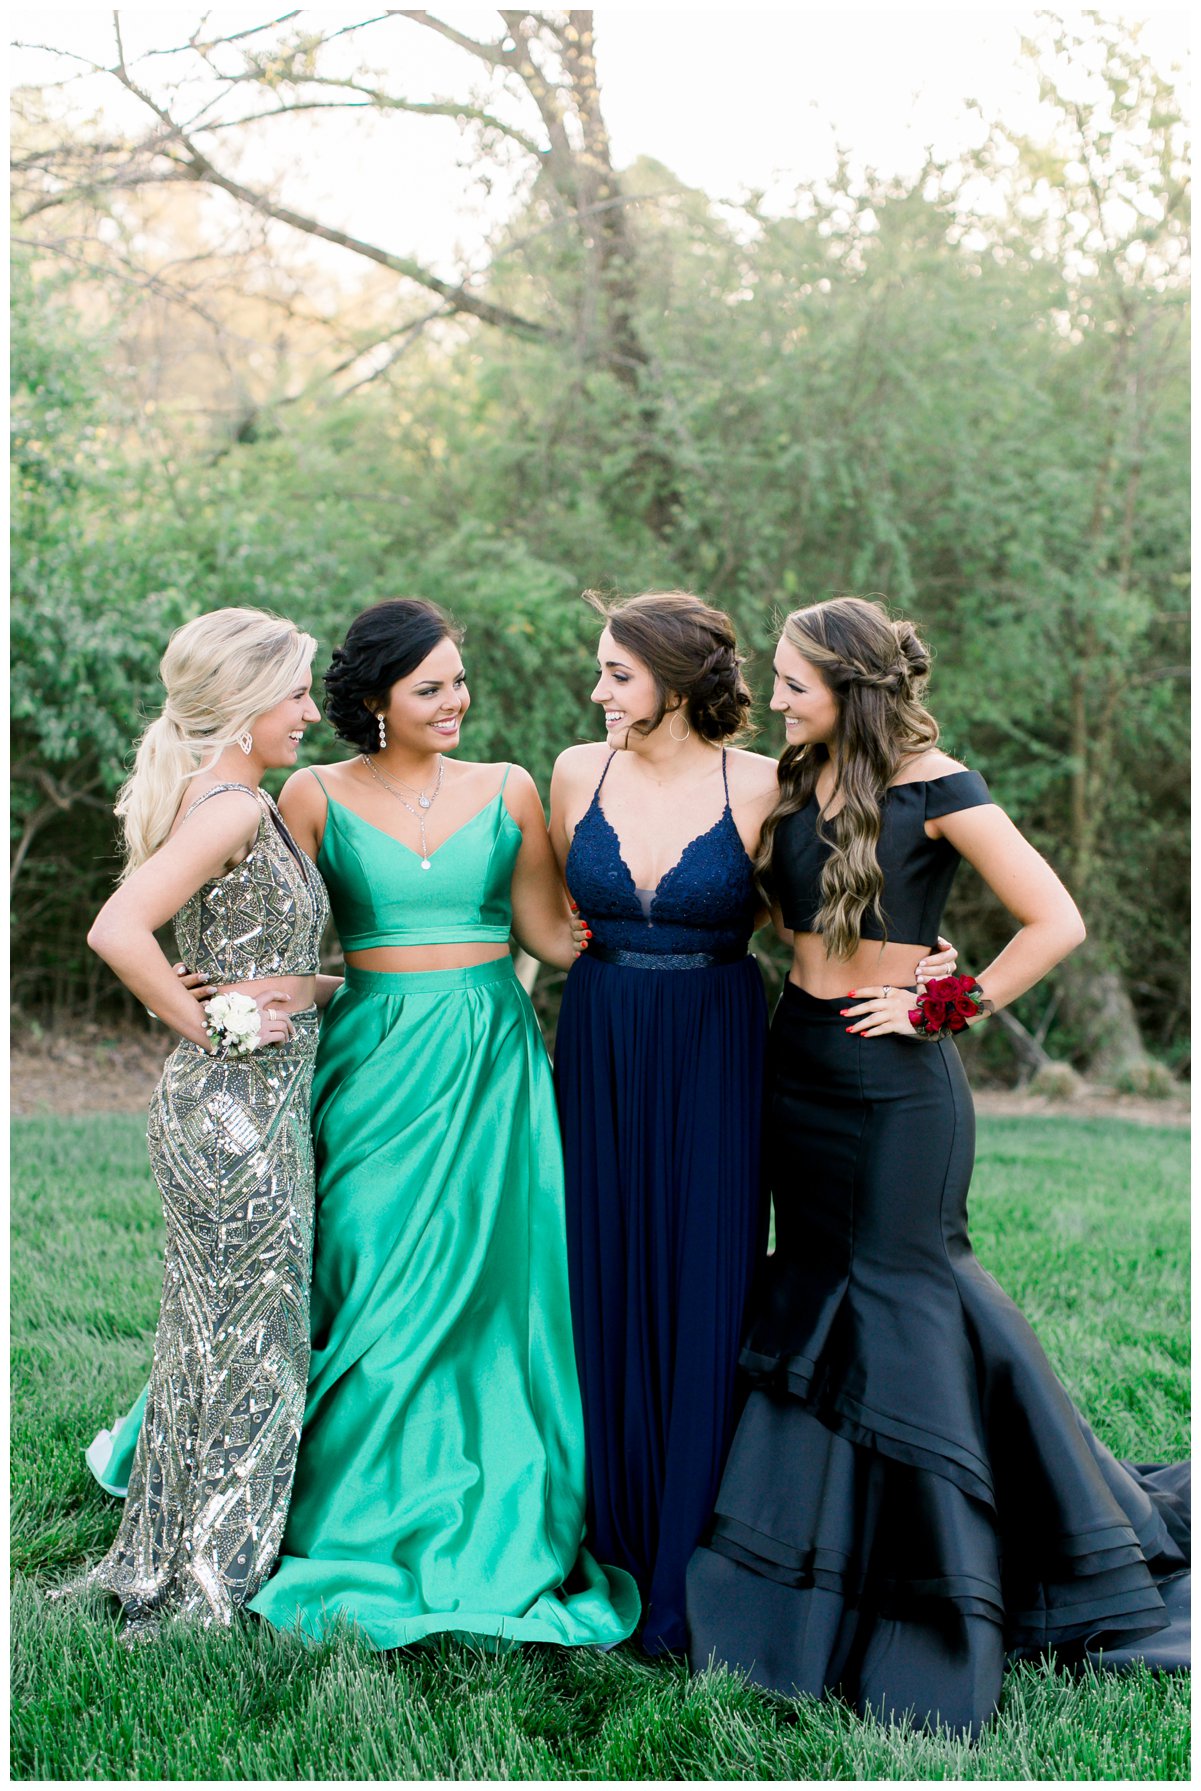 Maryville Senior Pictures | Maryville High School Prom | https